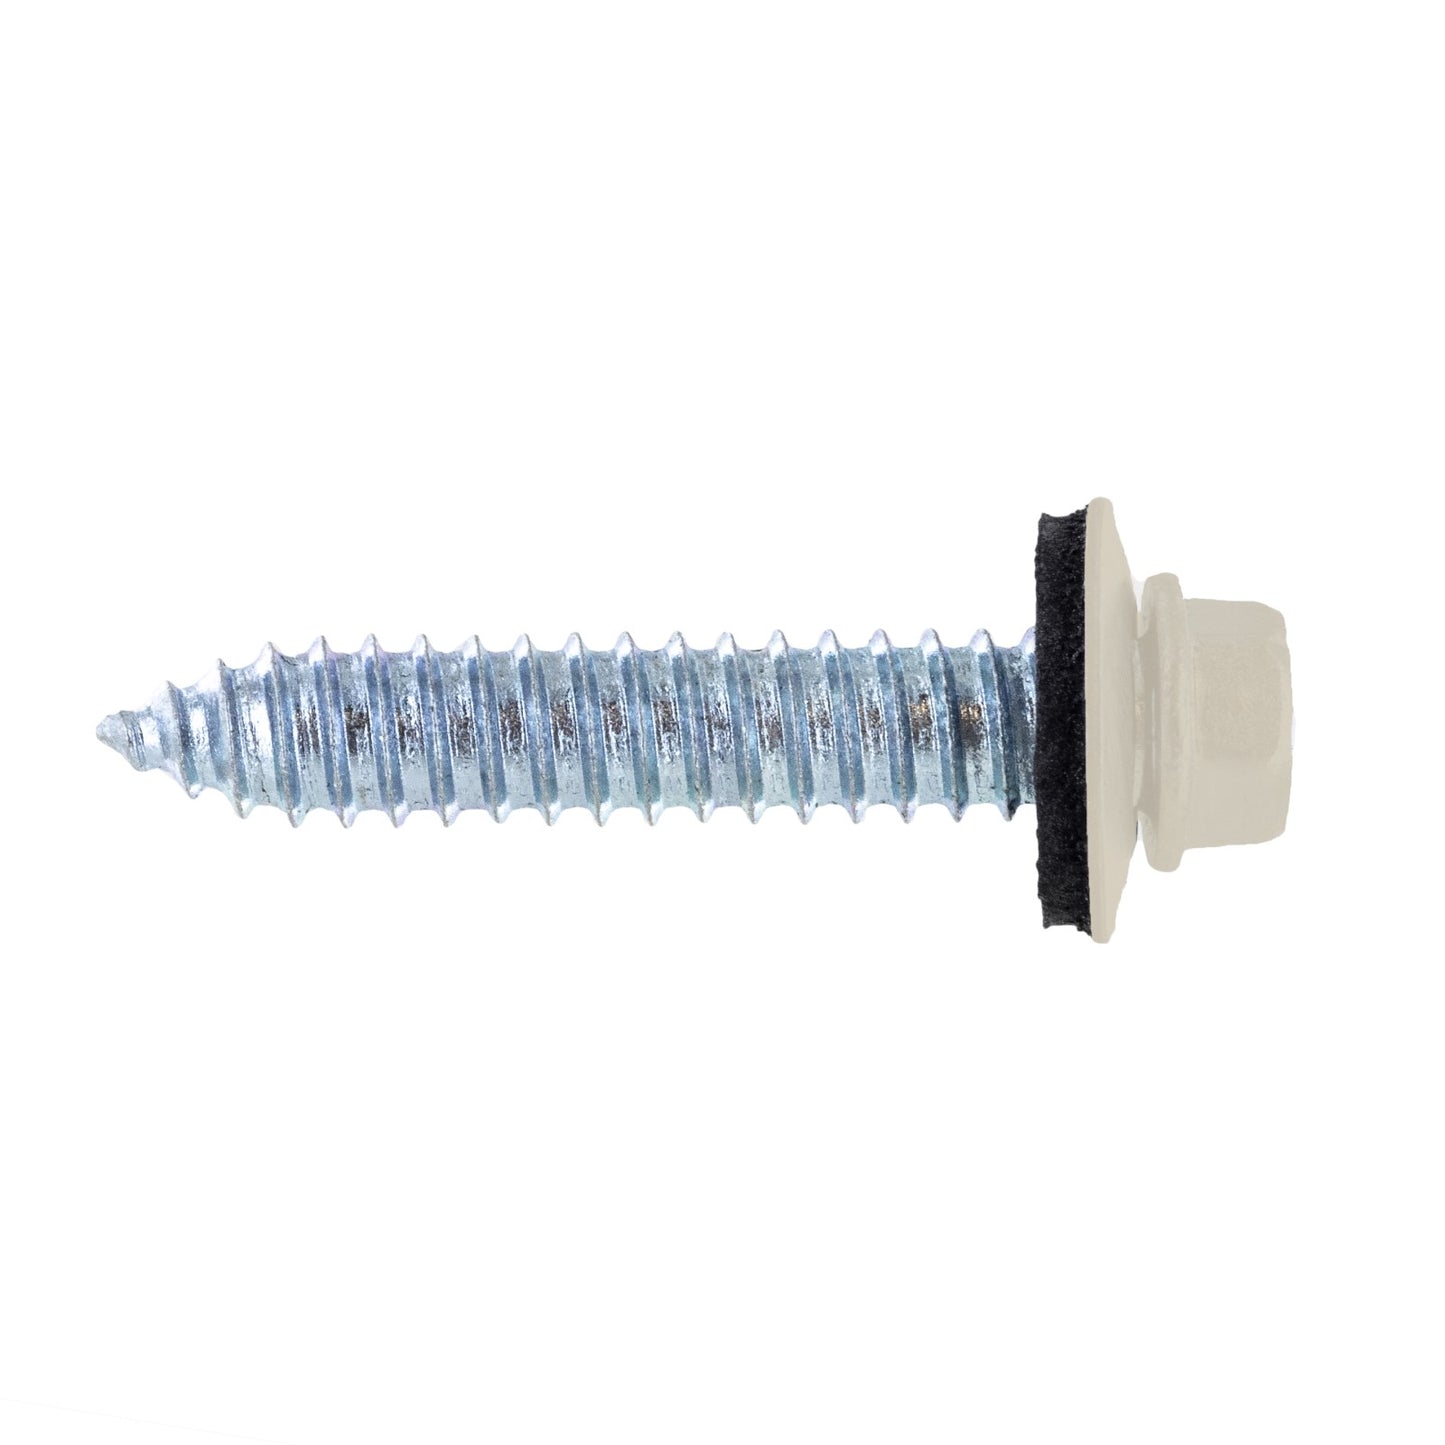 #17 x 1-1/2" Tapping Steelbinder Metal Roofing Screw - Light Stone - Pkg 250